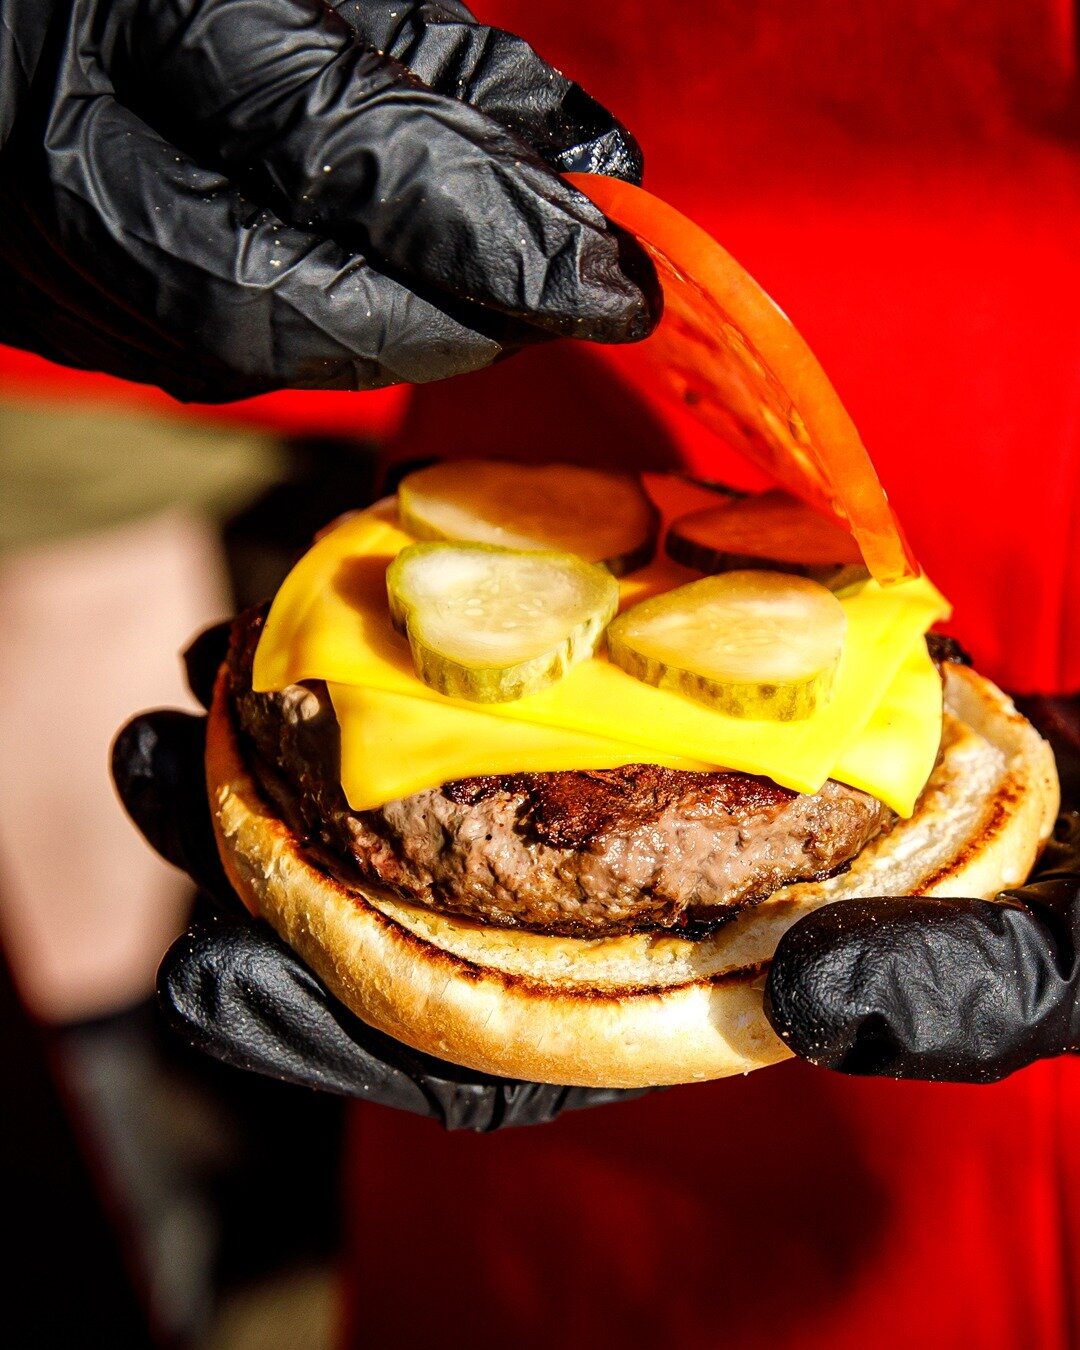 Our burgers is a timeless formula of sourcing the best ingredients and flawless execution 🙌